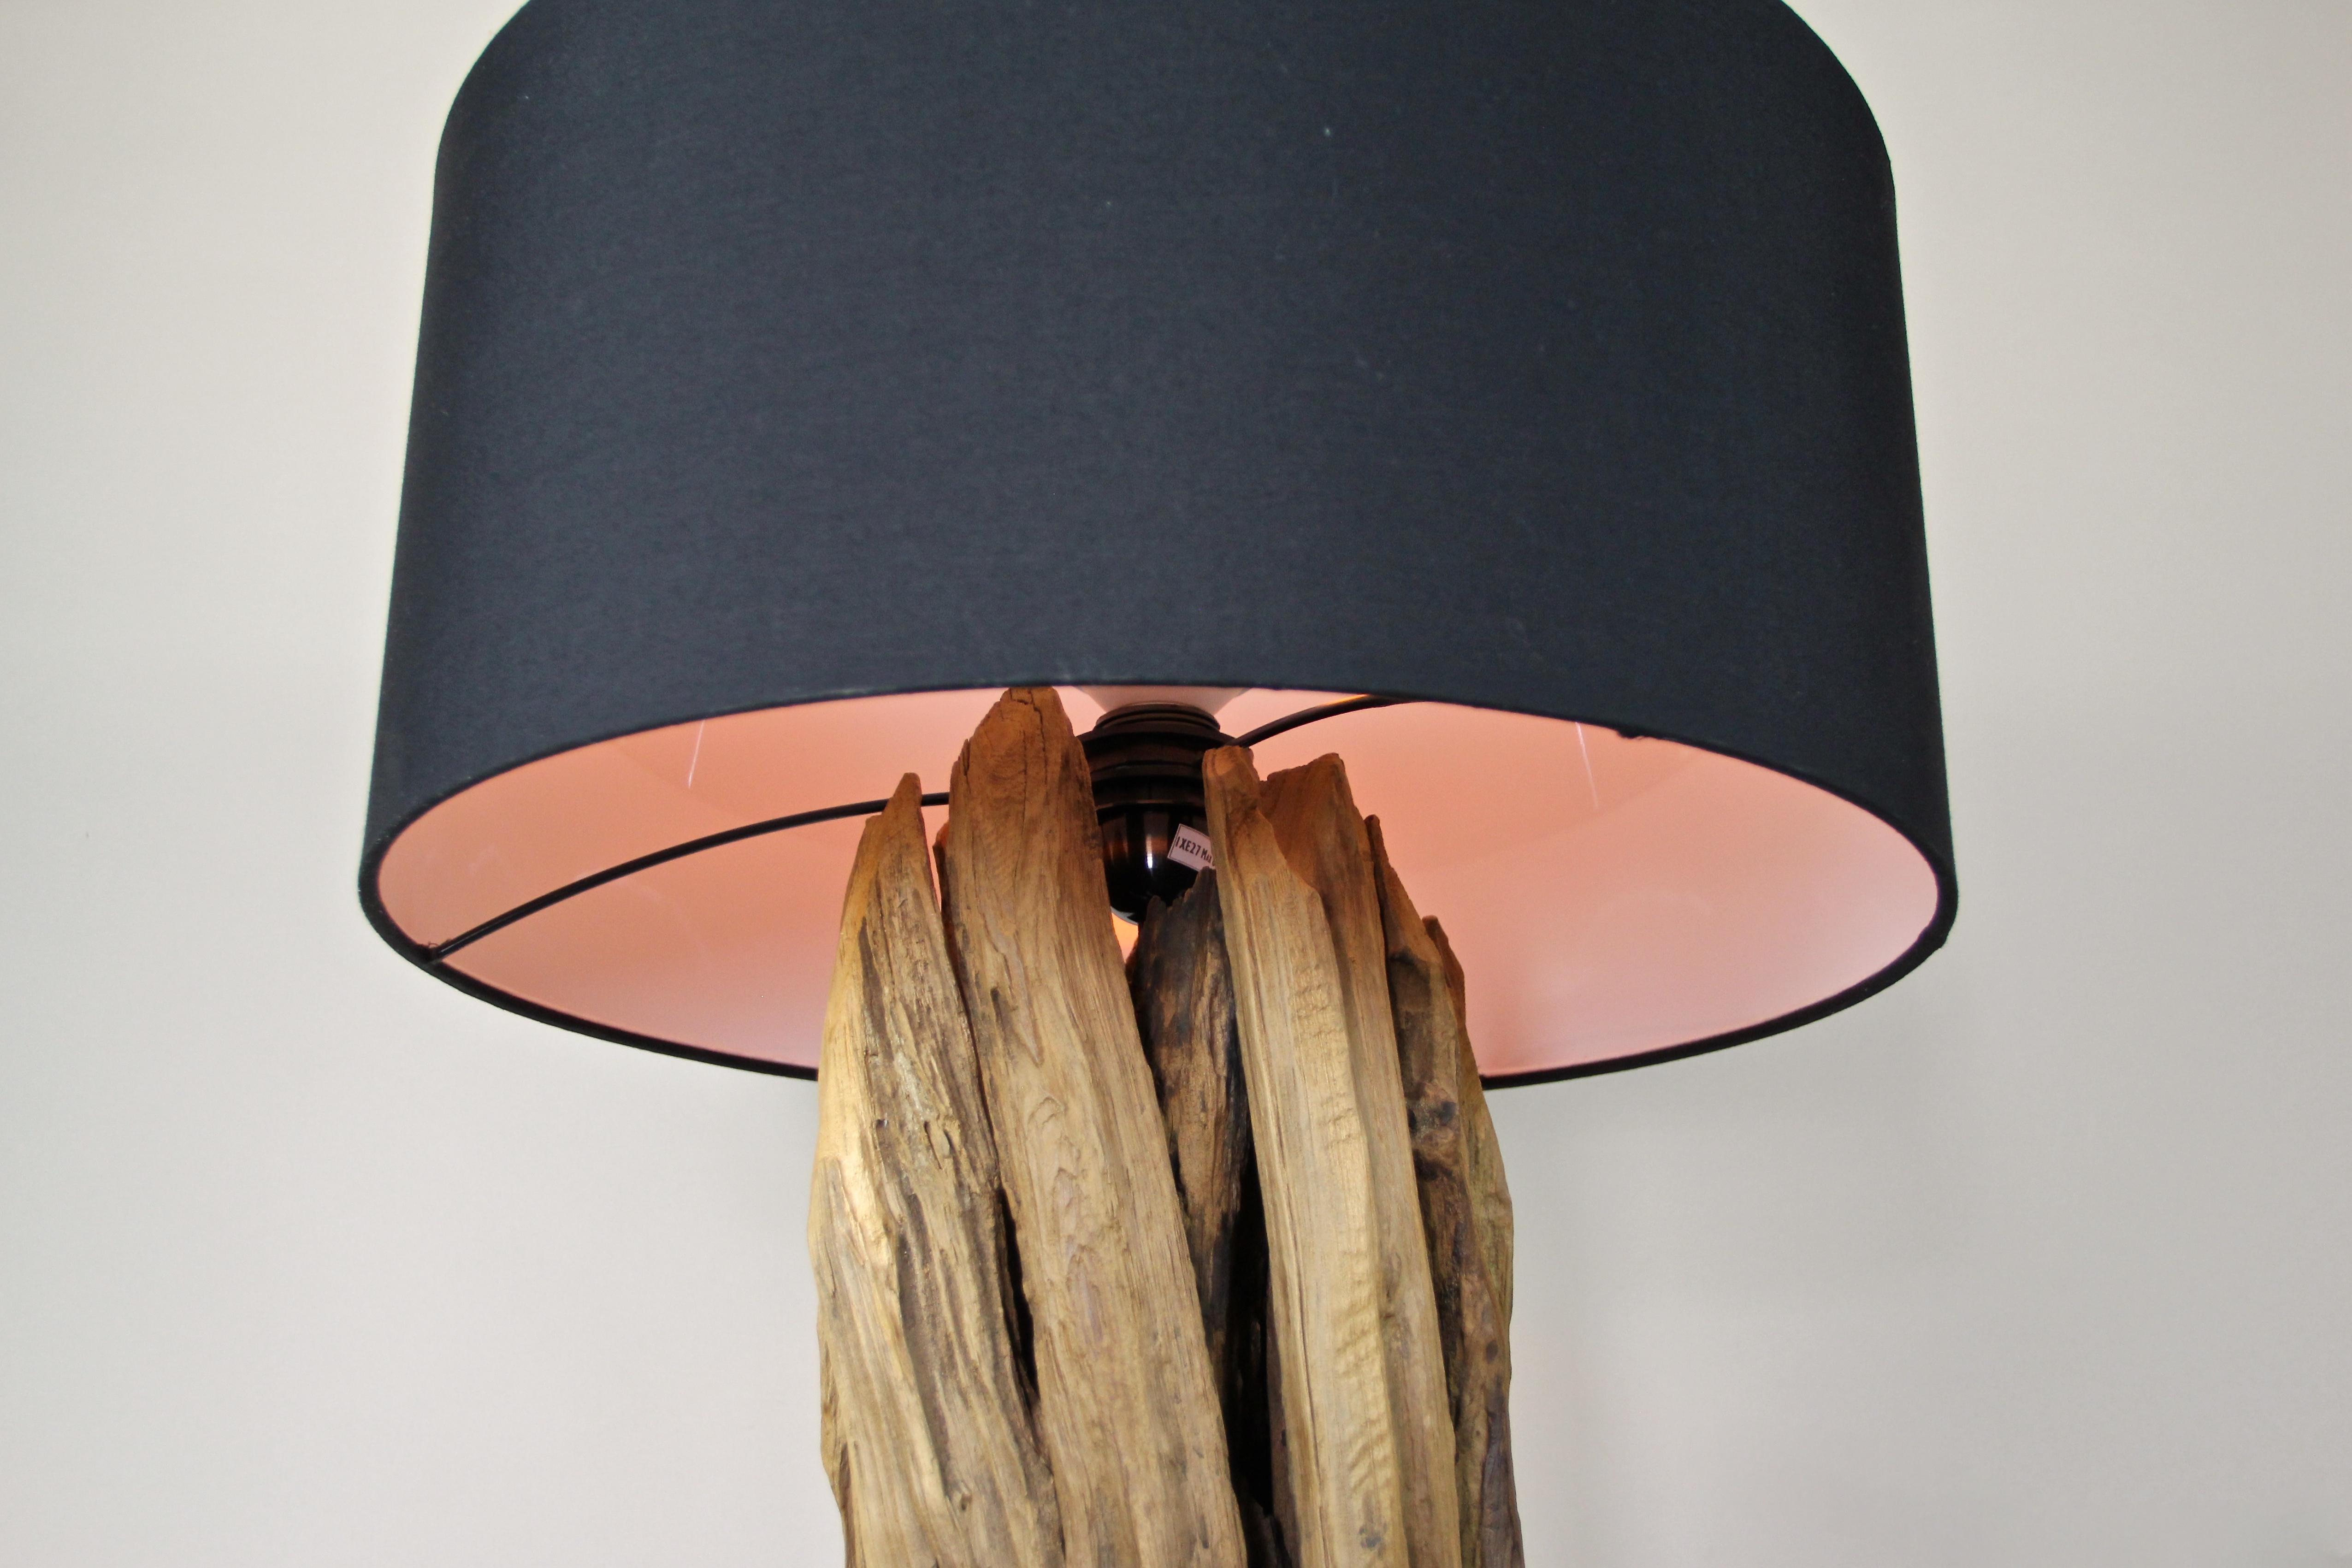 Italian Organic Modern Table Lamp with Old Driftwood and Greyblue Lampshade